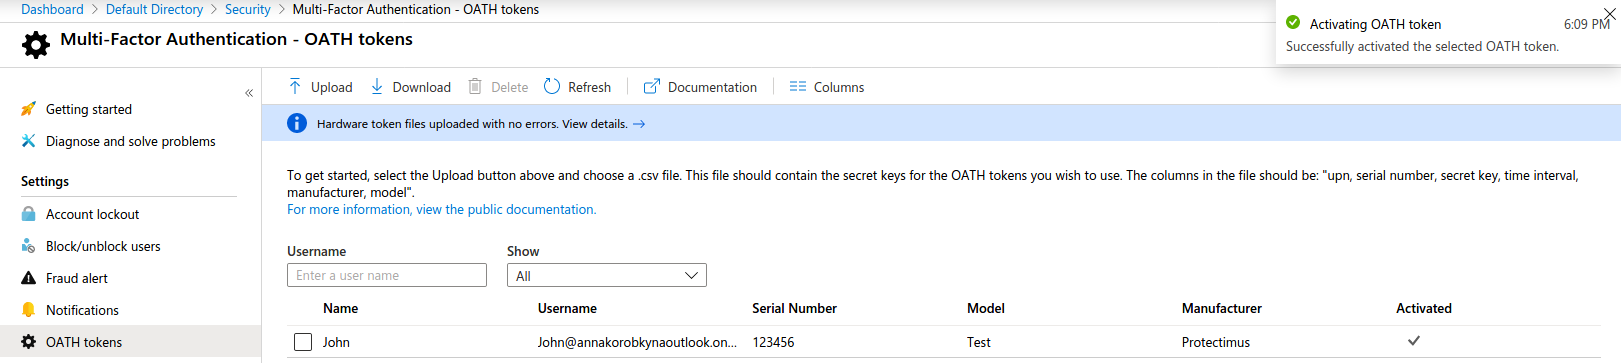 OATH tokens for Azure MFA setup activated